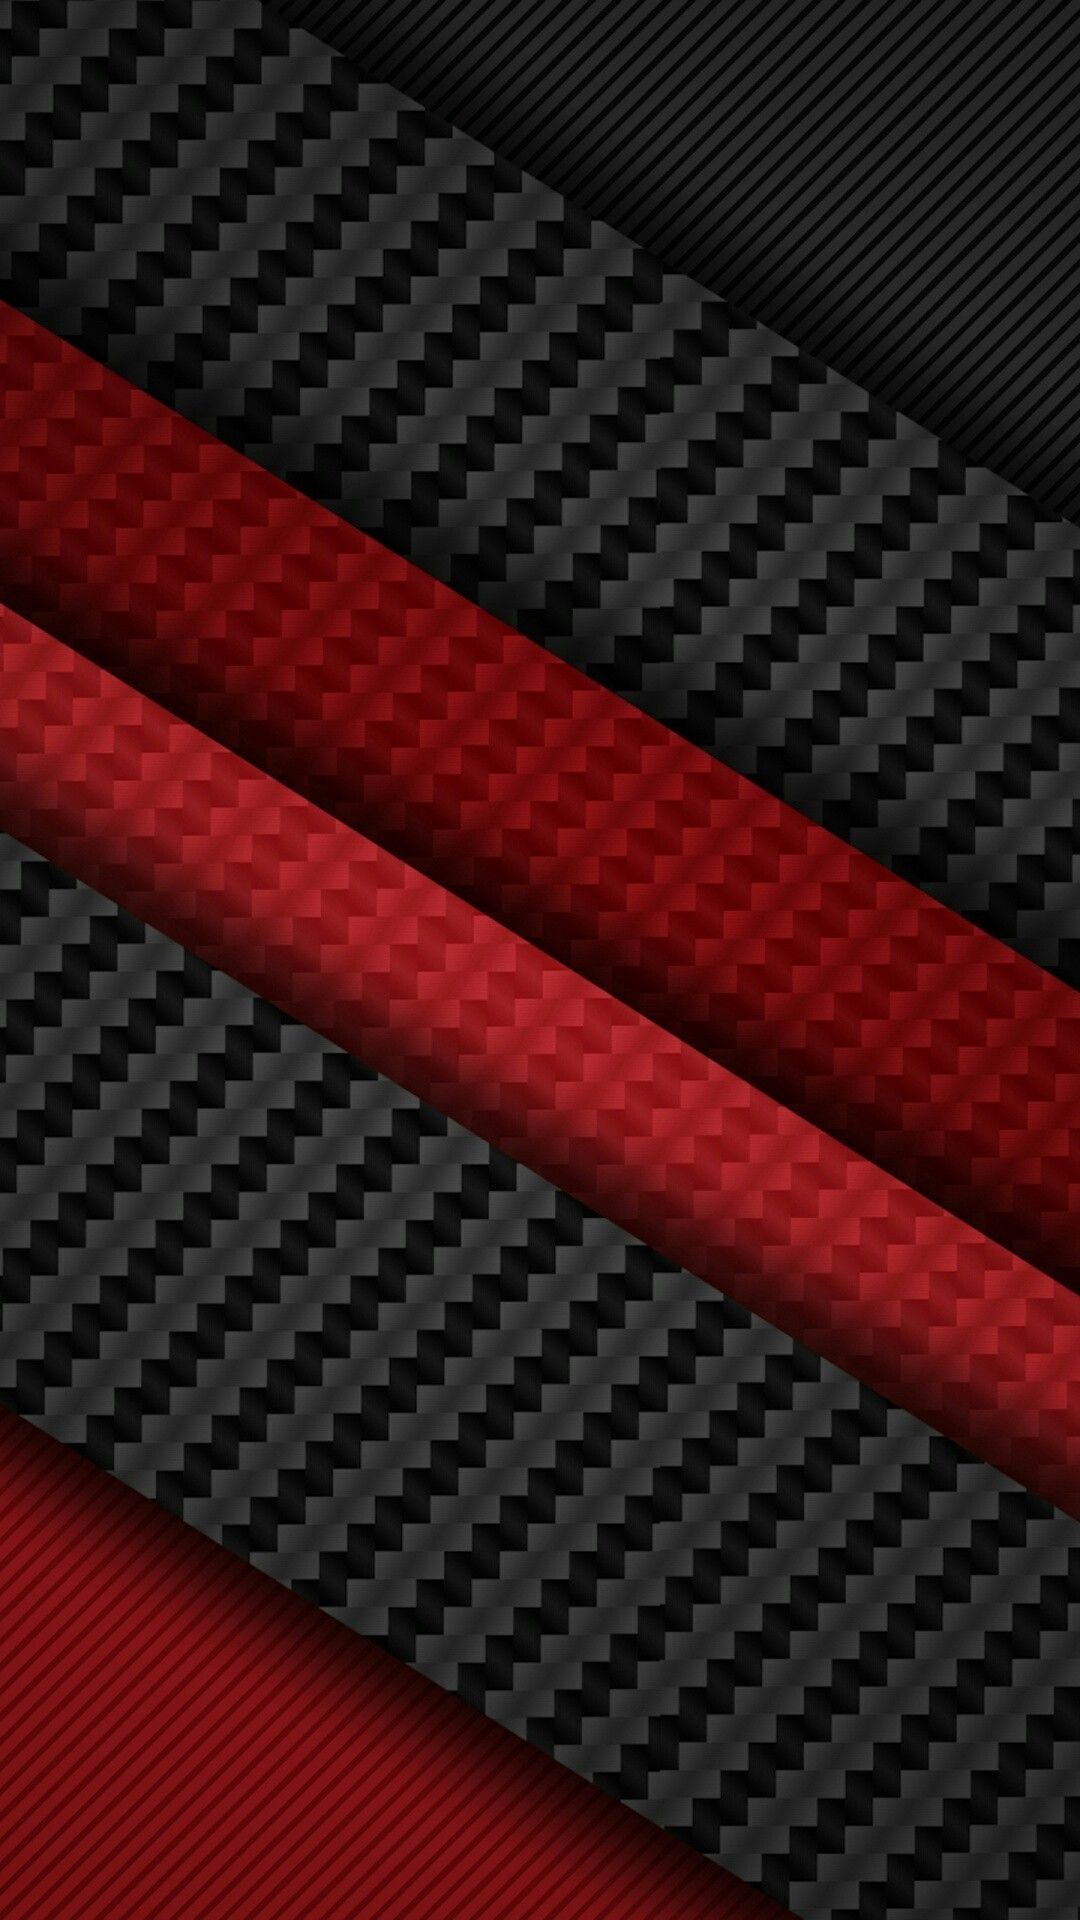 Black and Red iPhone Wallpaper